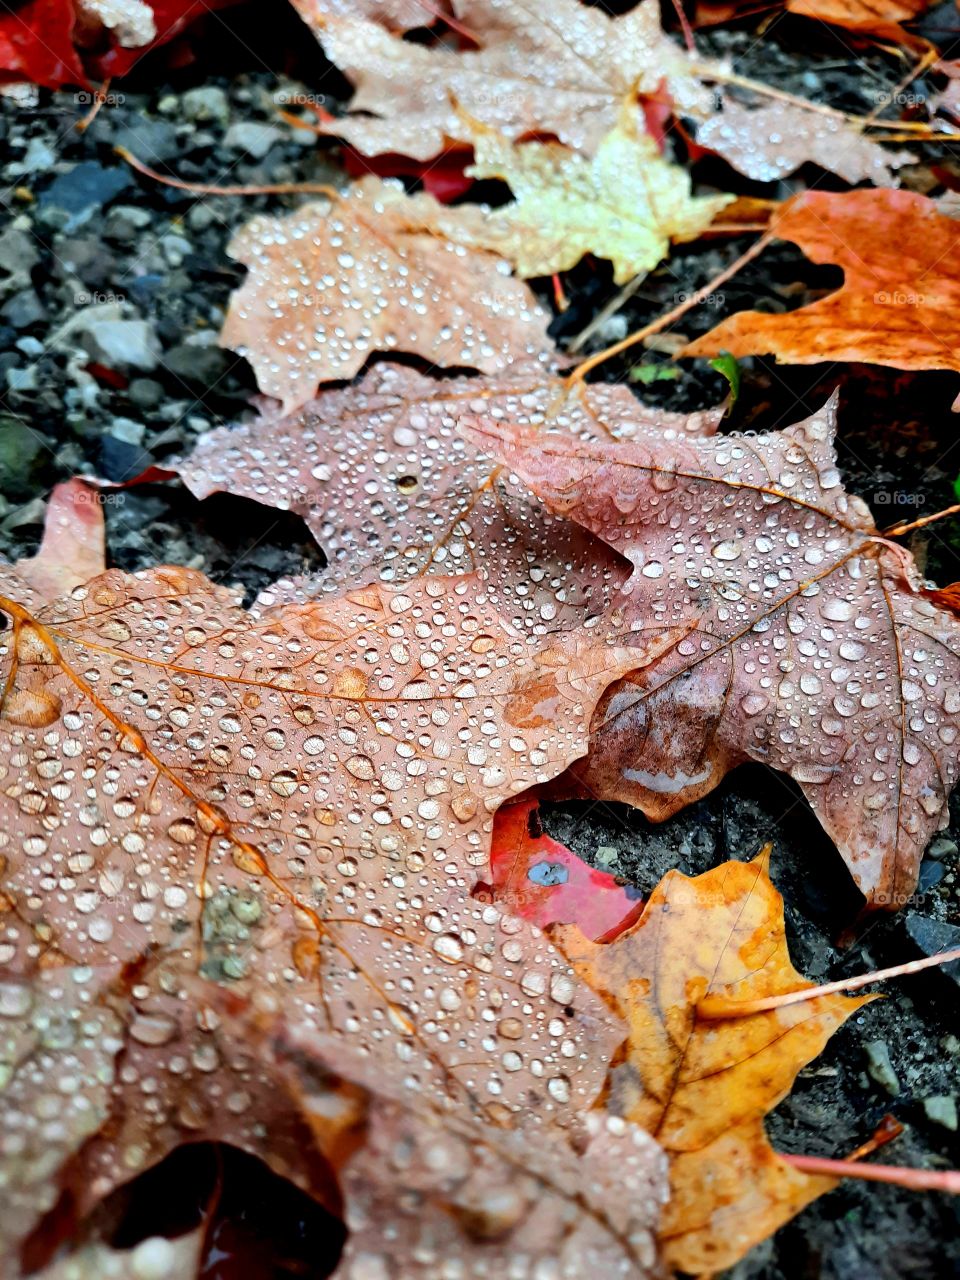 Autumn/Fall Season Coloured Maple Leaves in October with crystal clear and focused water droplets on them. Orange, Red and Yellow Leaves which signify the colours of autumn. Leaves on the pavement/ground.